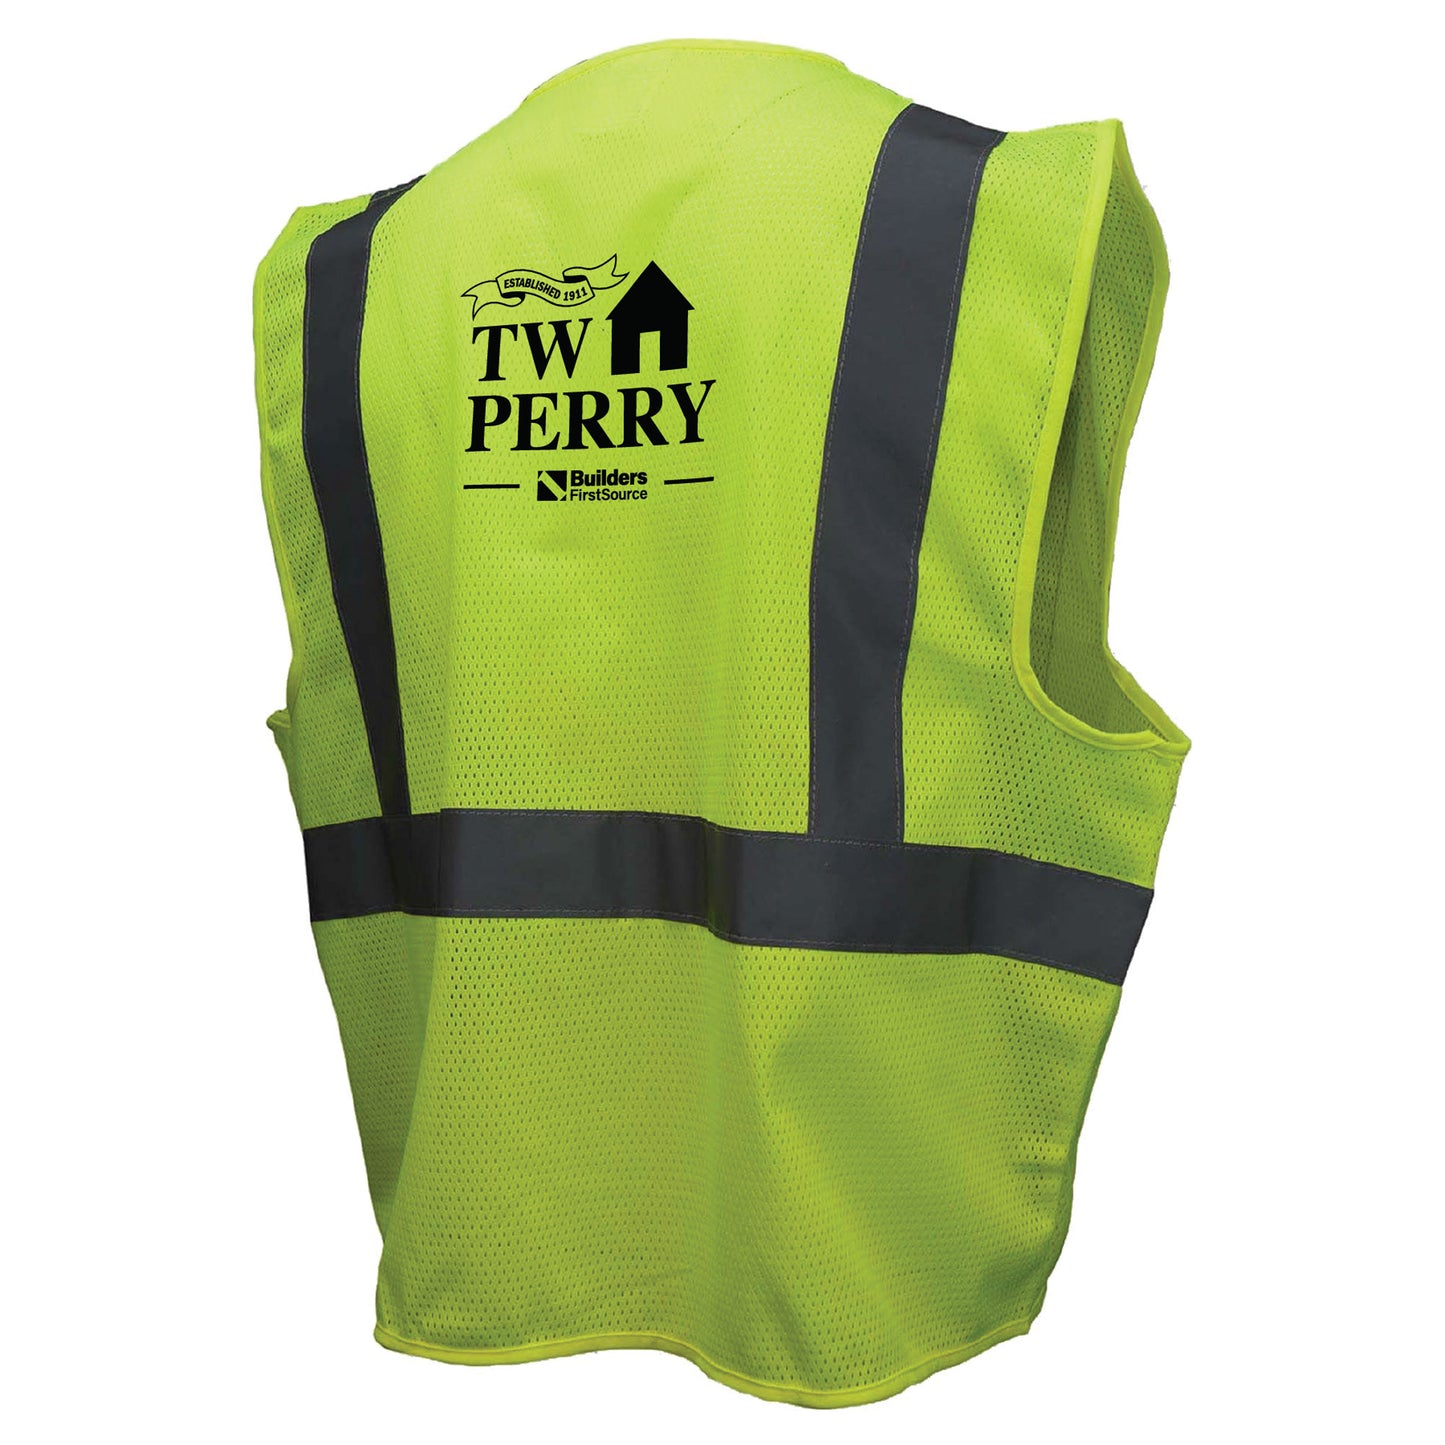 TW Perry - Economy Mesh Safety Vest with Zipper, ANSI 2, R